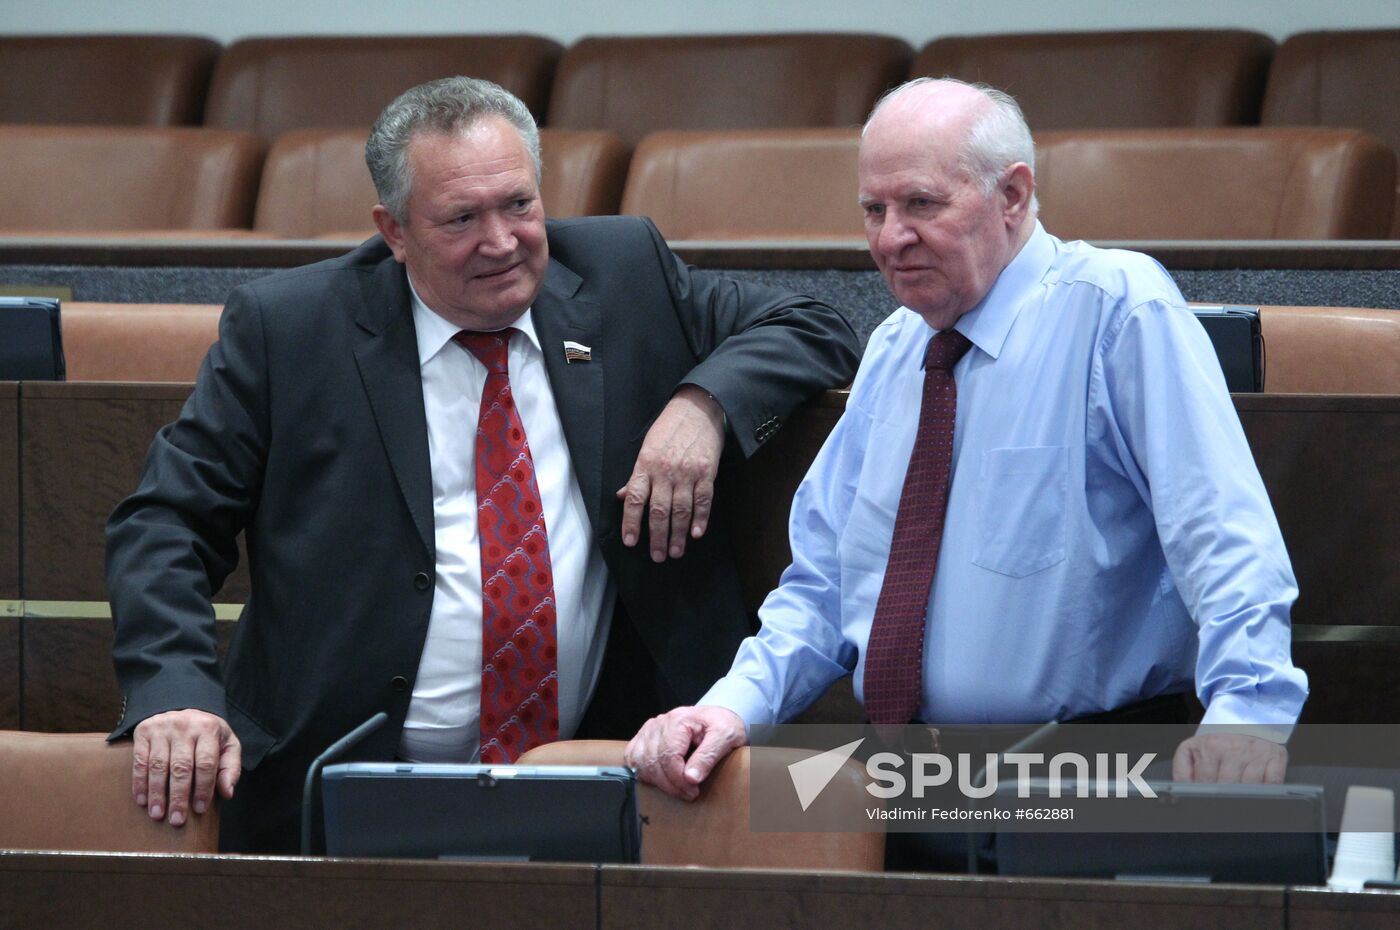 Meeting of Federation Council on May 13, 2010